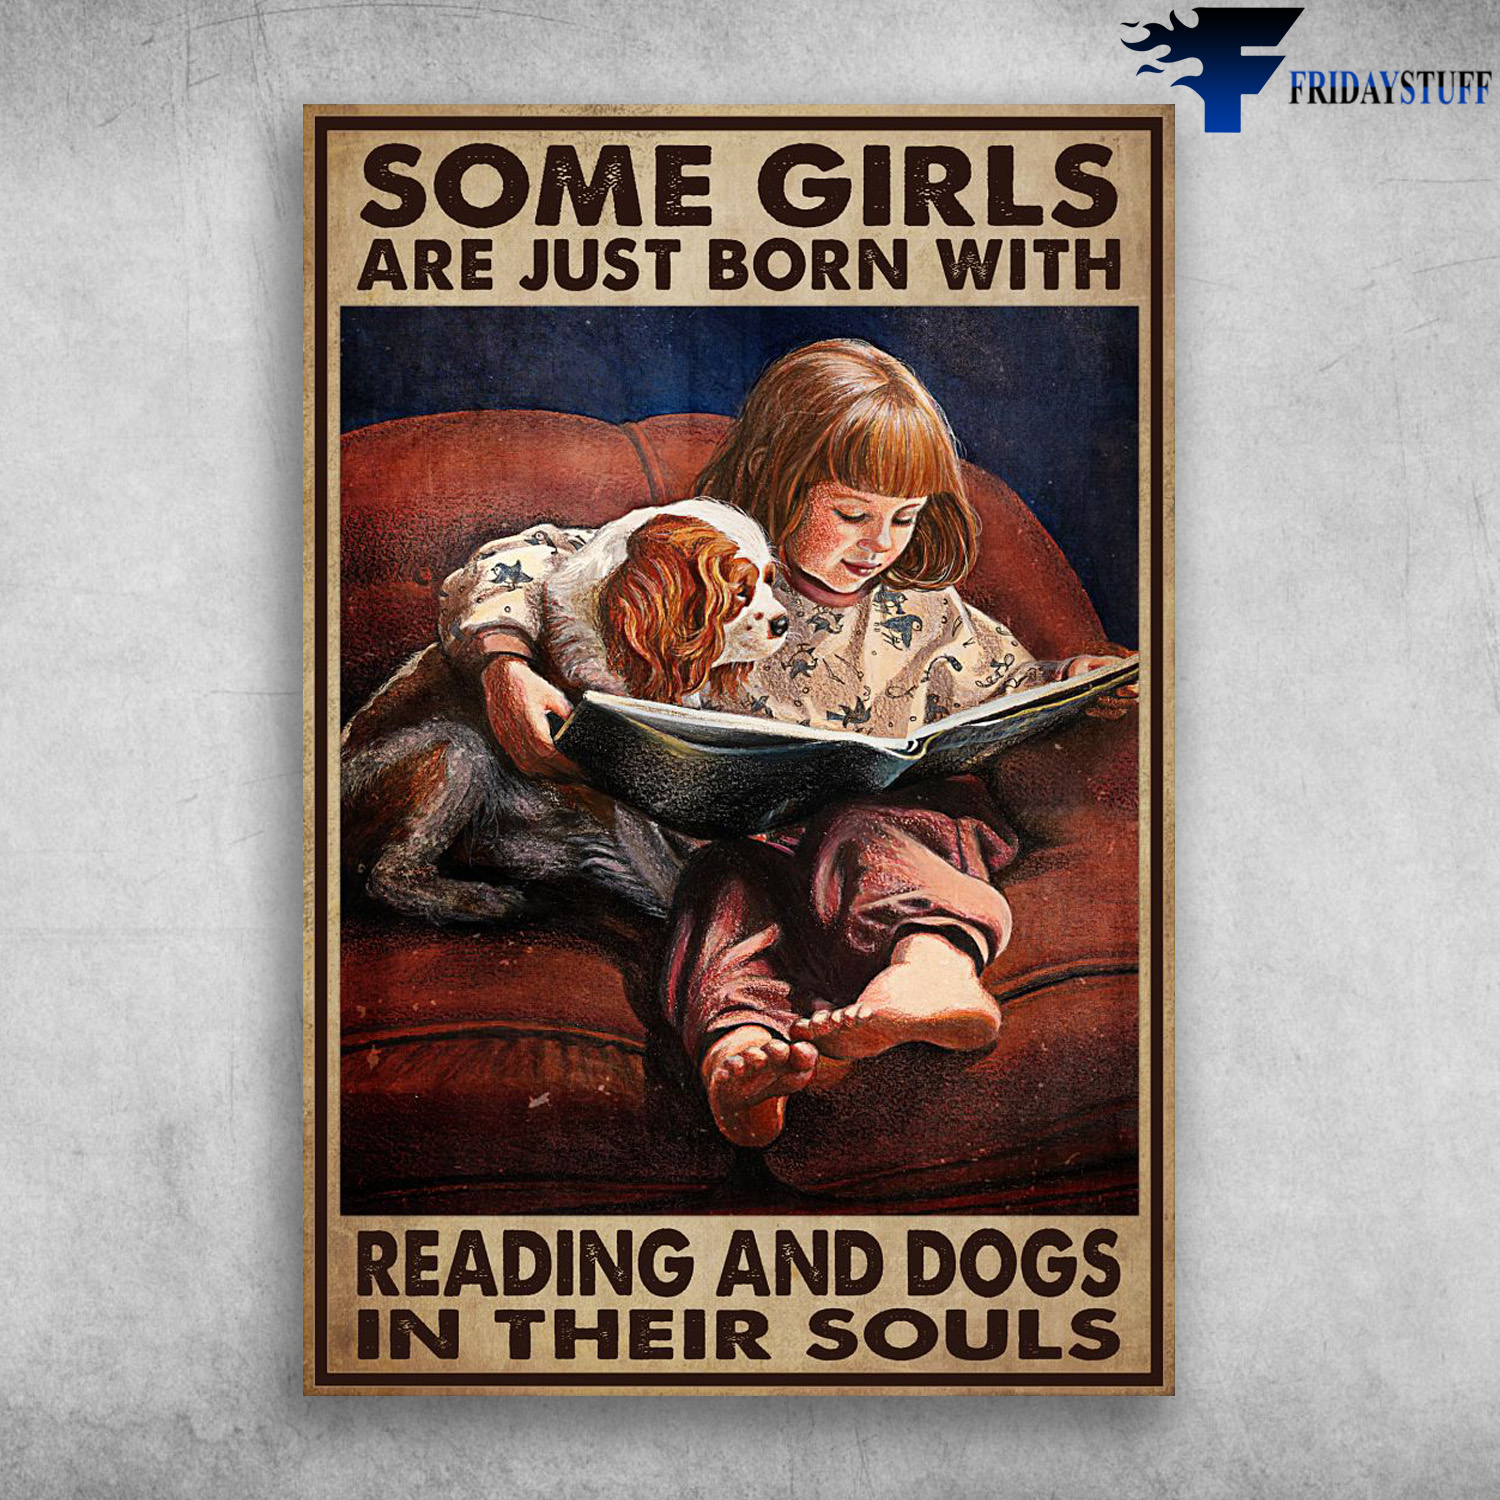 Girl And Dog Reading Book - Some Girls Are Just Born With Reading And Dogs, In Their Souls